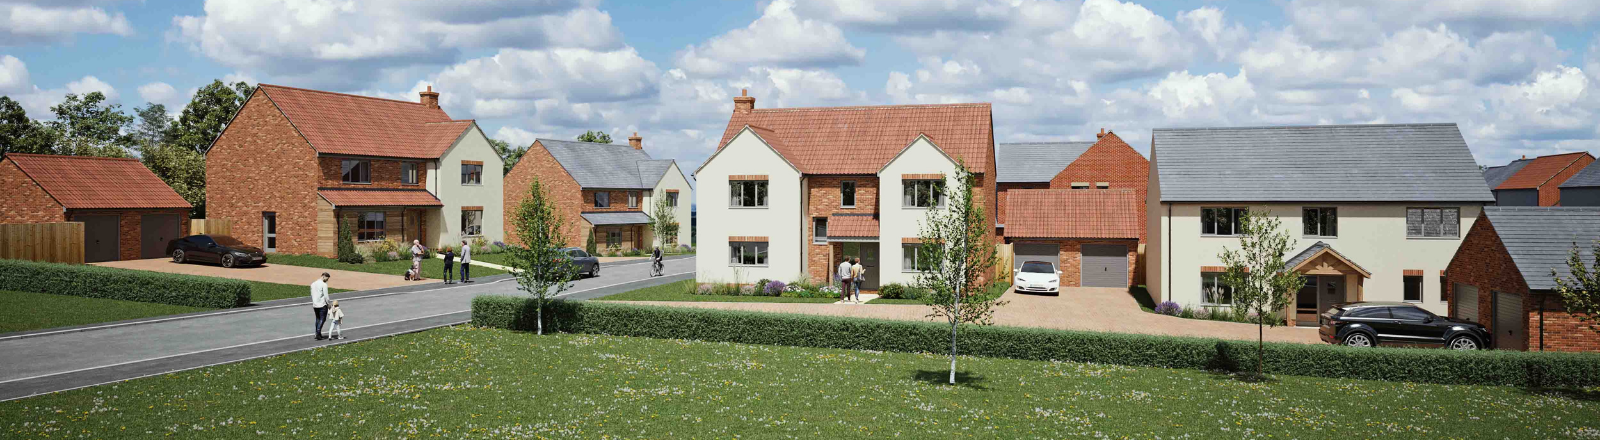 Street scene at Rotherby Manor | Rotherby Manor | Bowbridge Homes